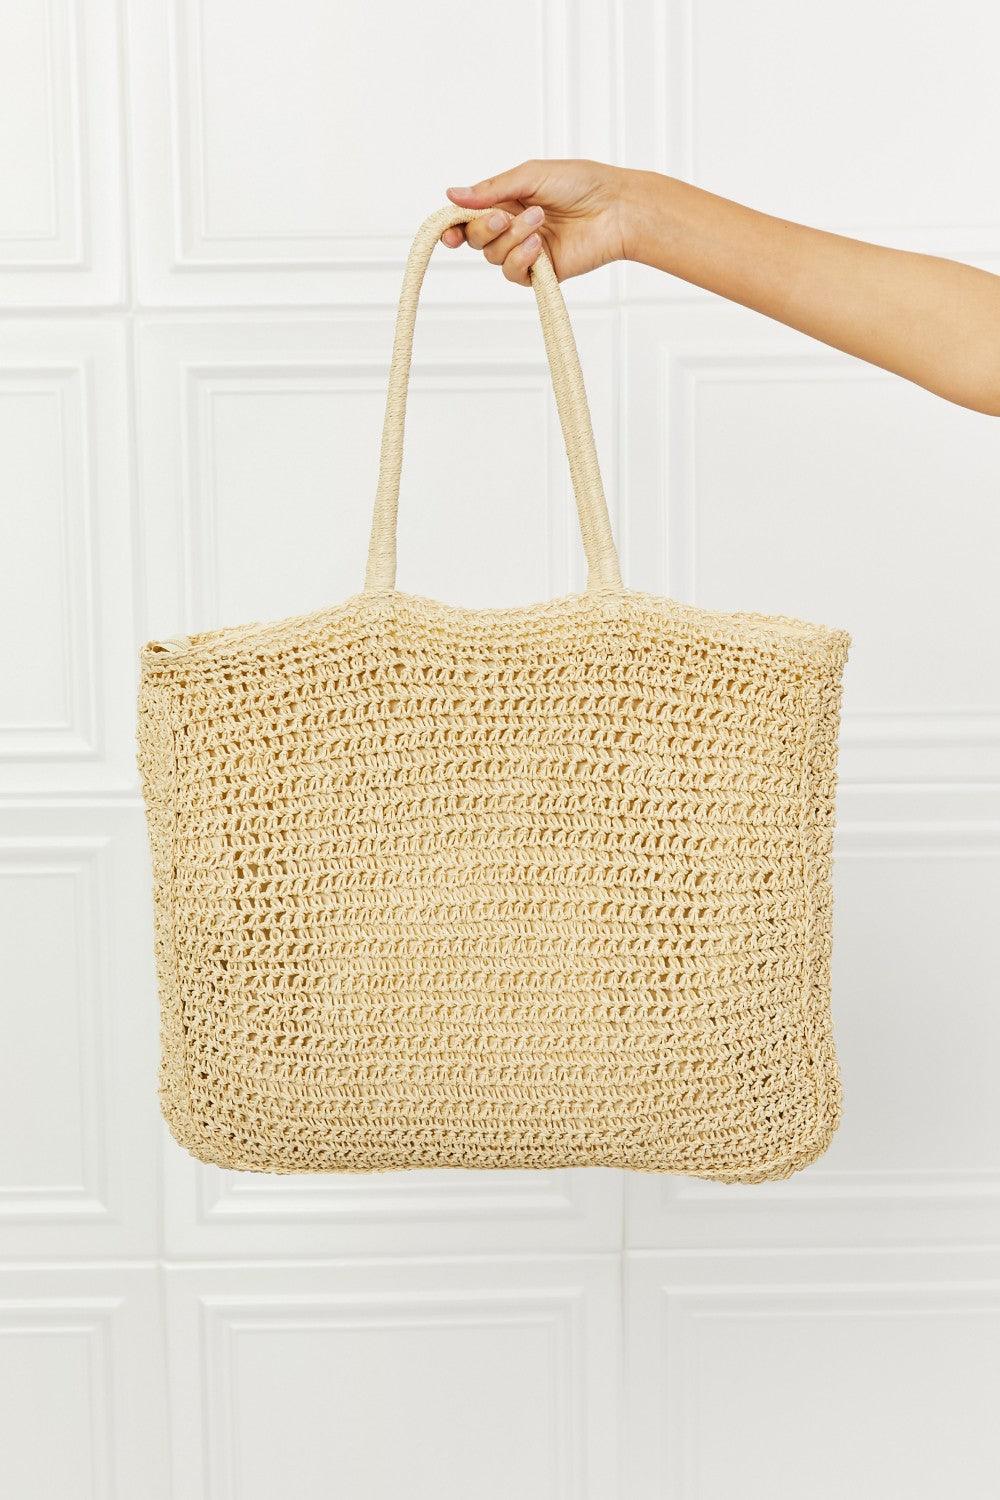 Fame Off the Coast Straw Tote Bag - SteelBlue